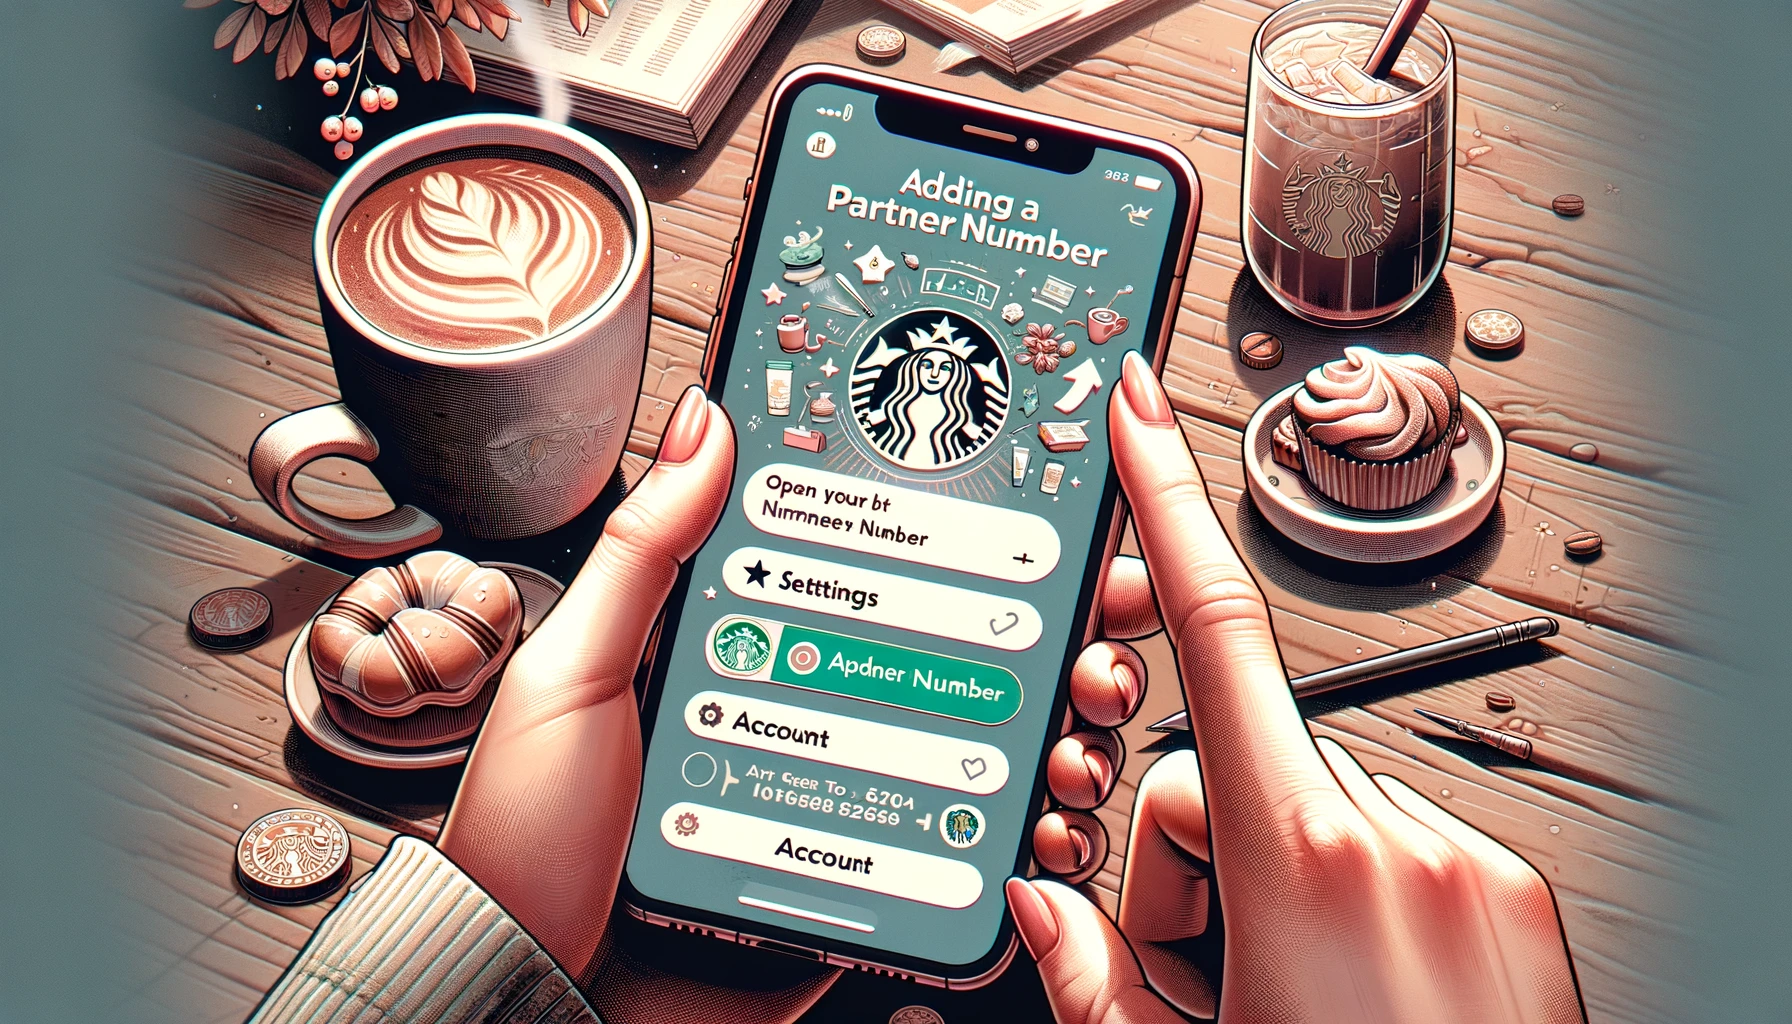 How to Add Starbucks Partner Number to App